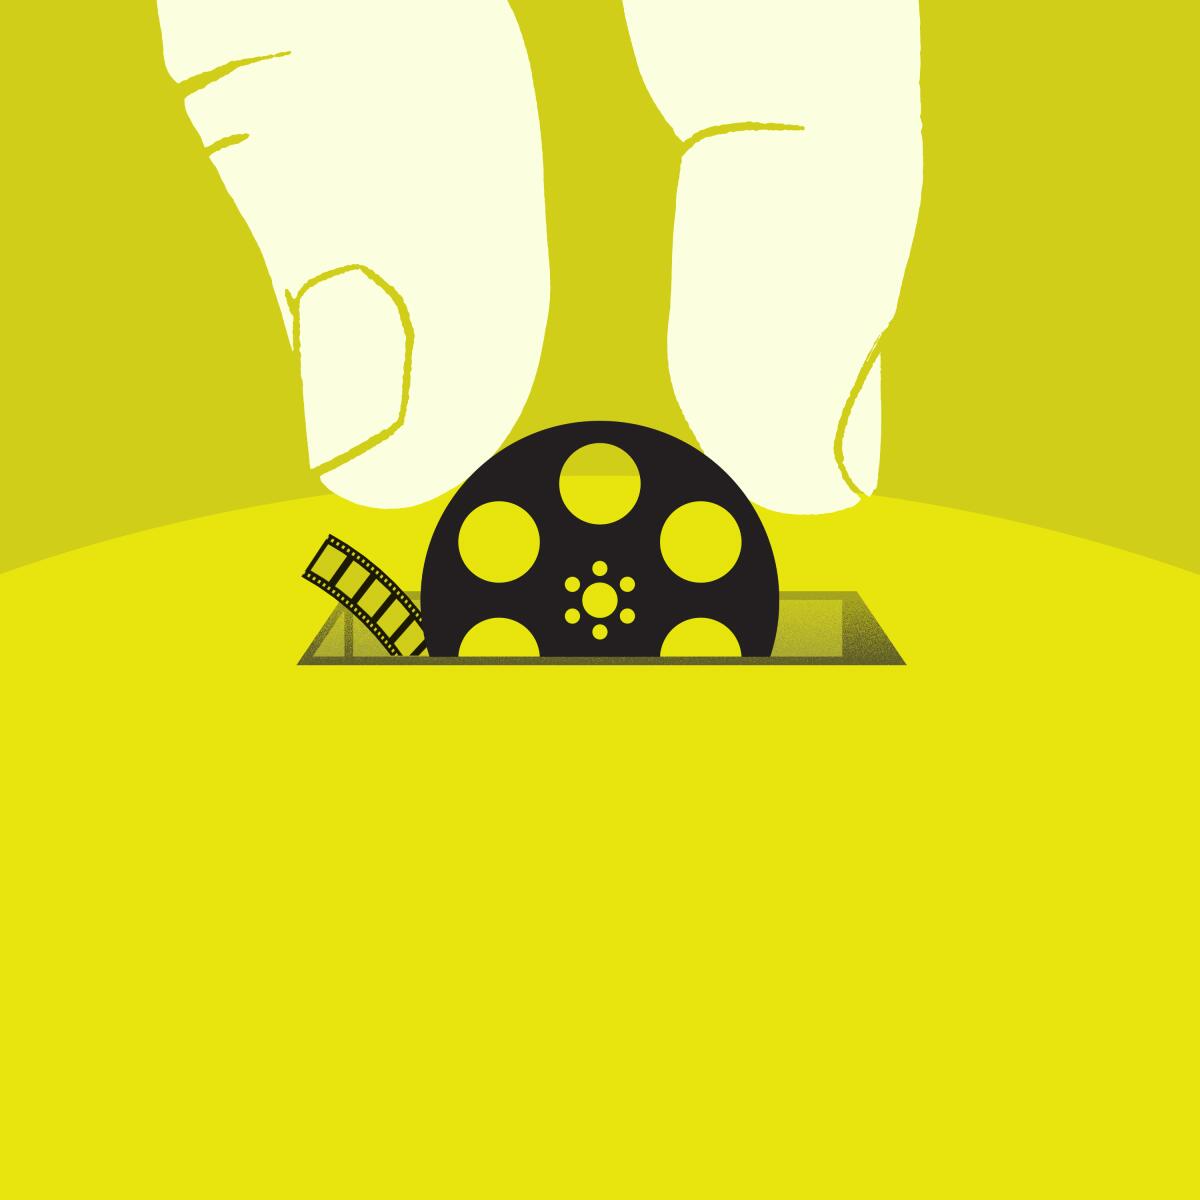 Illustration of fingers inserting a film reel into a coin slot.